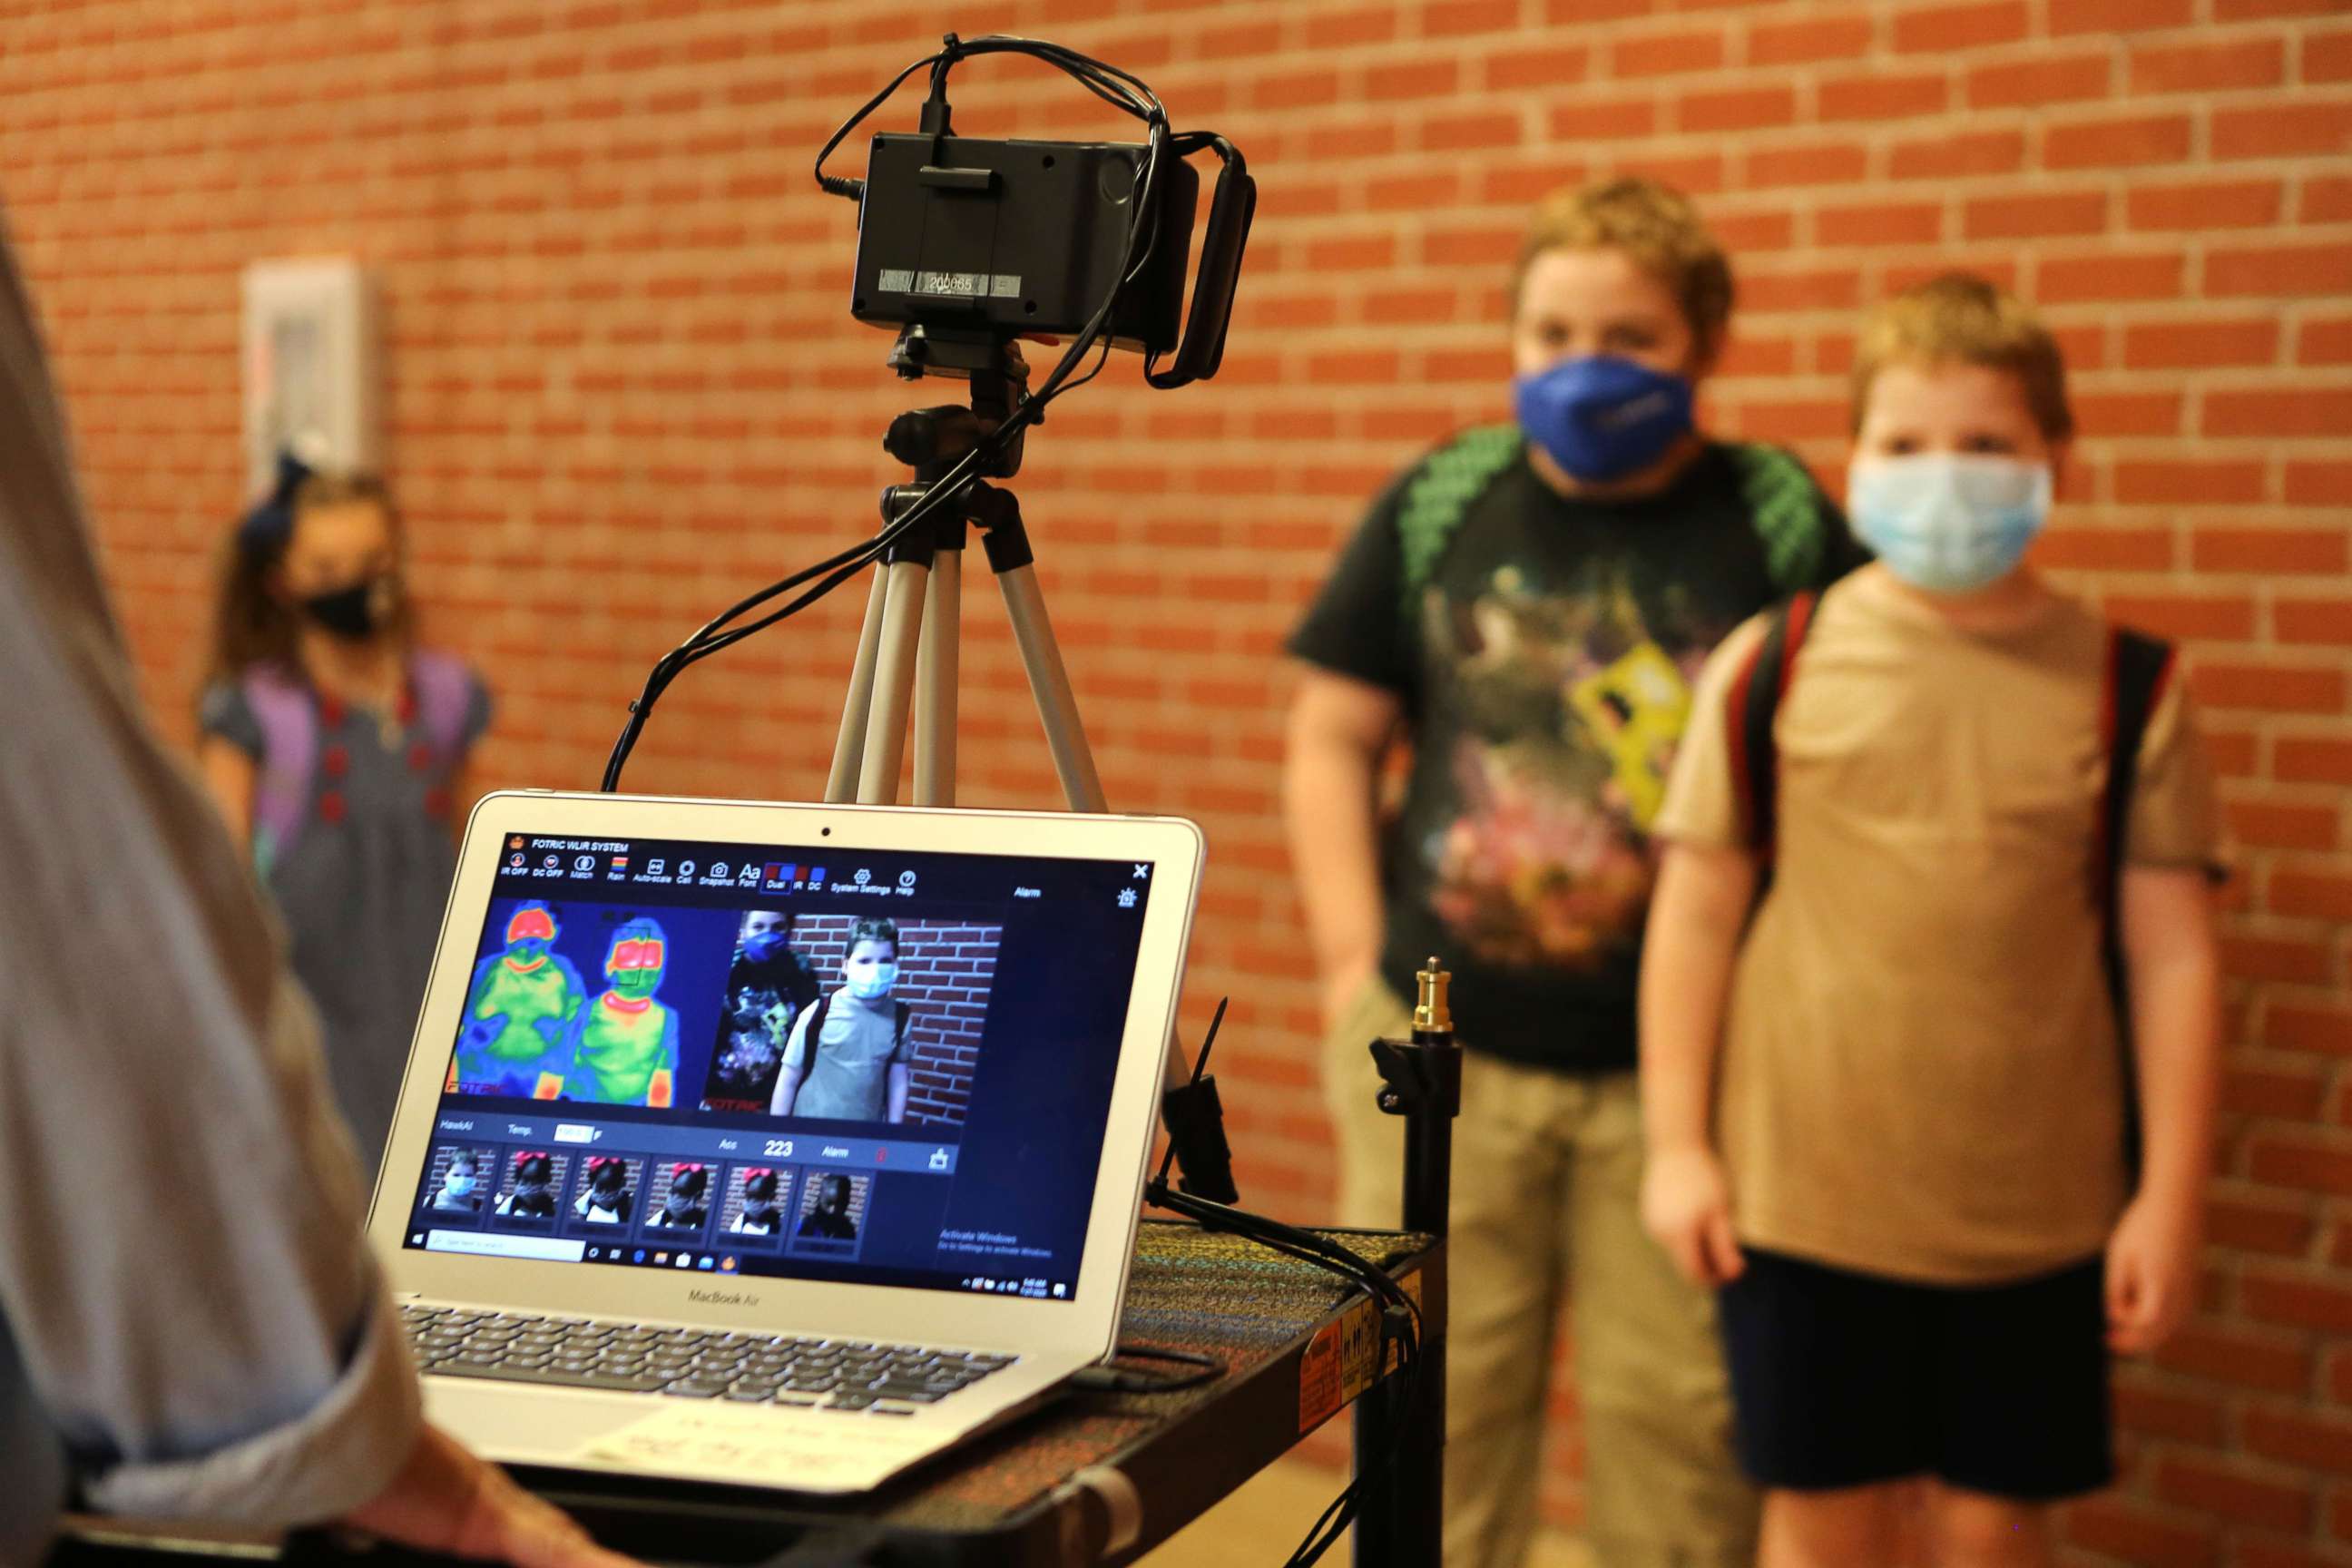 PHOTO: Corinth Elementary School students have their temperature checked by a thermal scanner as they arrive for their first day back to school Monday, July 27, 2020 in Corinth, Miss.